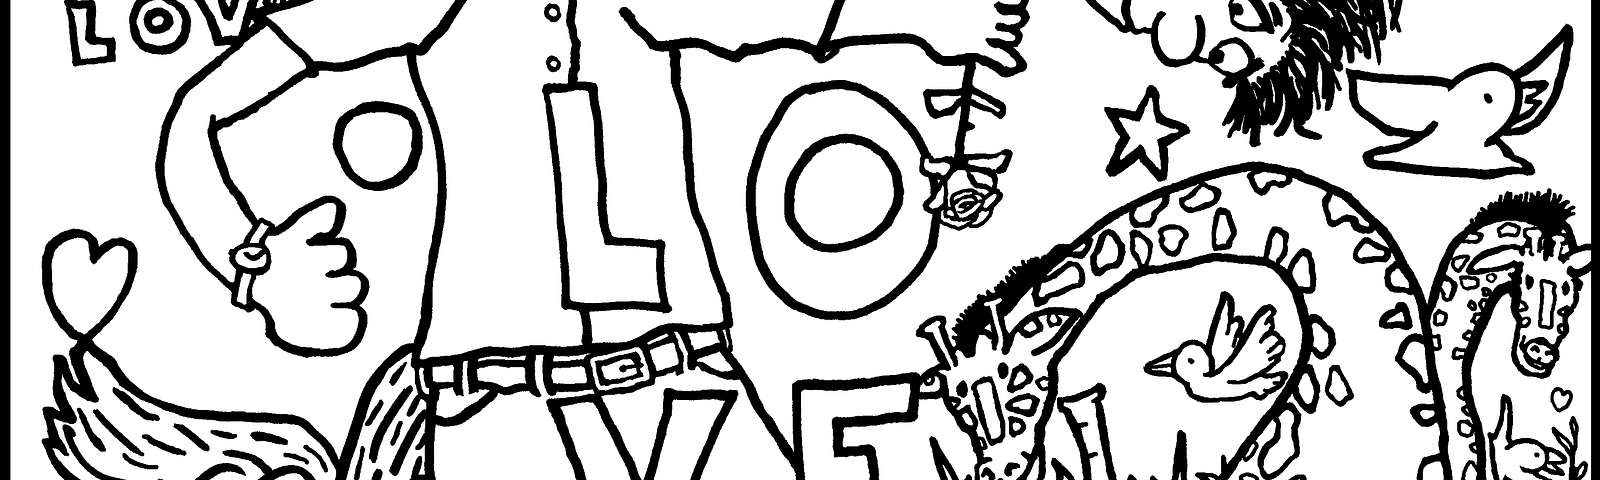 A chaotic cartoon coloring page, excerpted from my book, Color Me With Hugs. The image has a human with a very long neck surrounded by lots of animals and the word ‘love’ written a few times. Animals include an elephant, some birds, a chameleon, a pelican, a couple of giraffes, a lion, a tortoise, a squirrel, and a bunny. Art by Doodleslice 2016